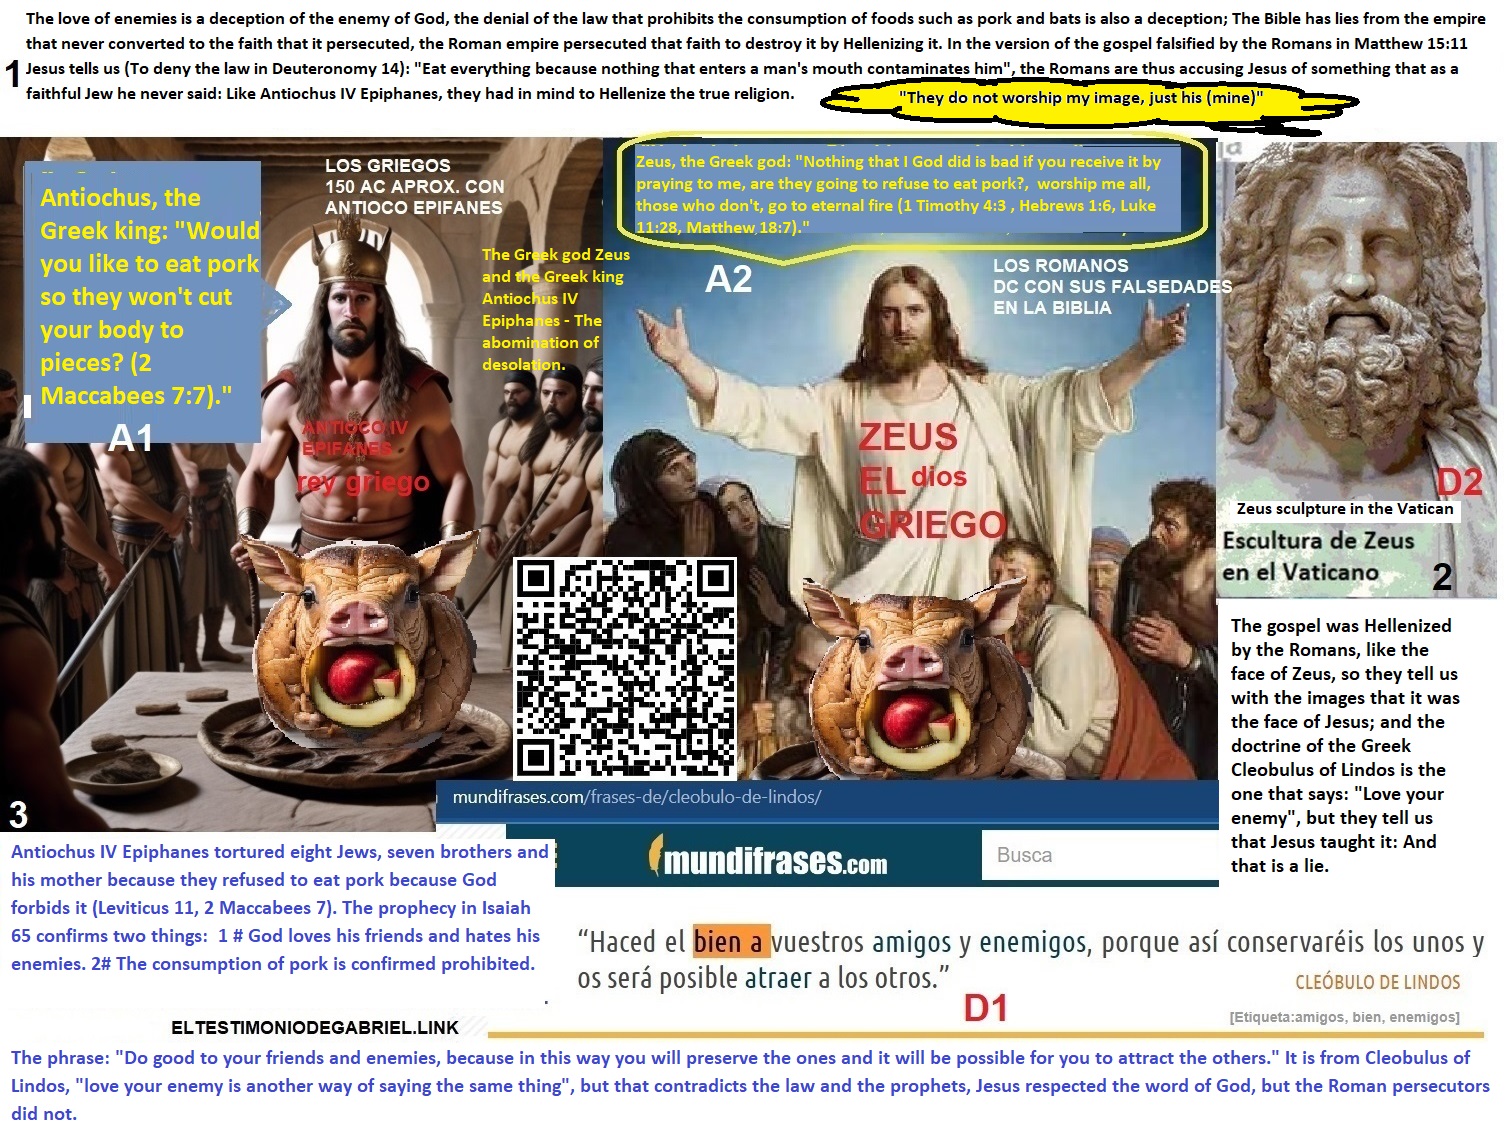 idi02-the-greek-god-zeus-and-the-greek-king-antiochus-iv-epiphanes-the-abomination-of-desolation